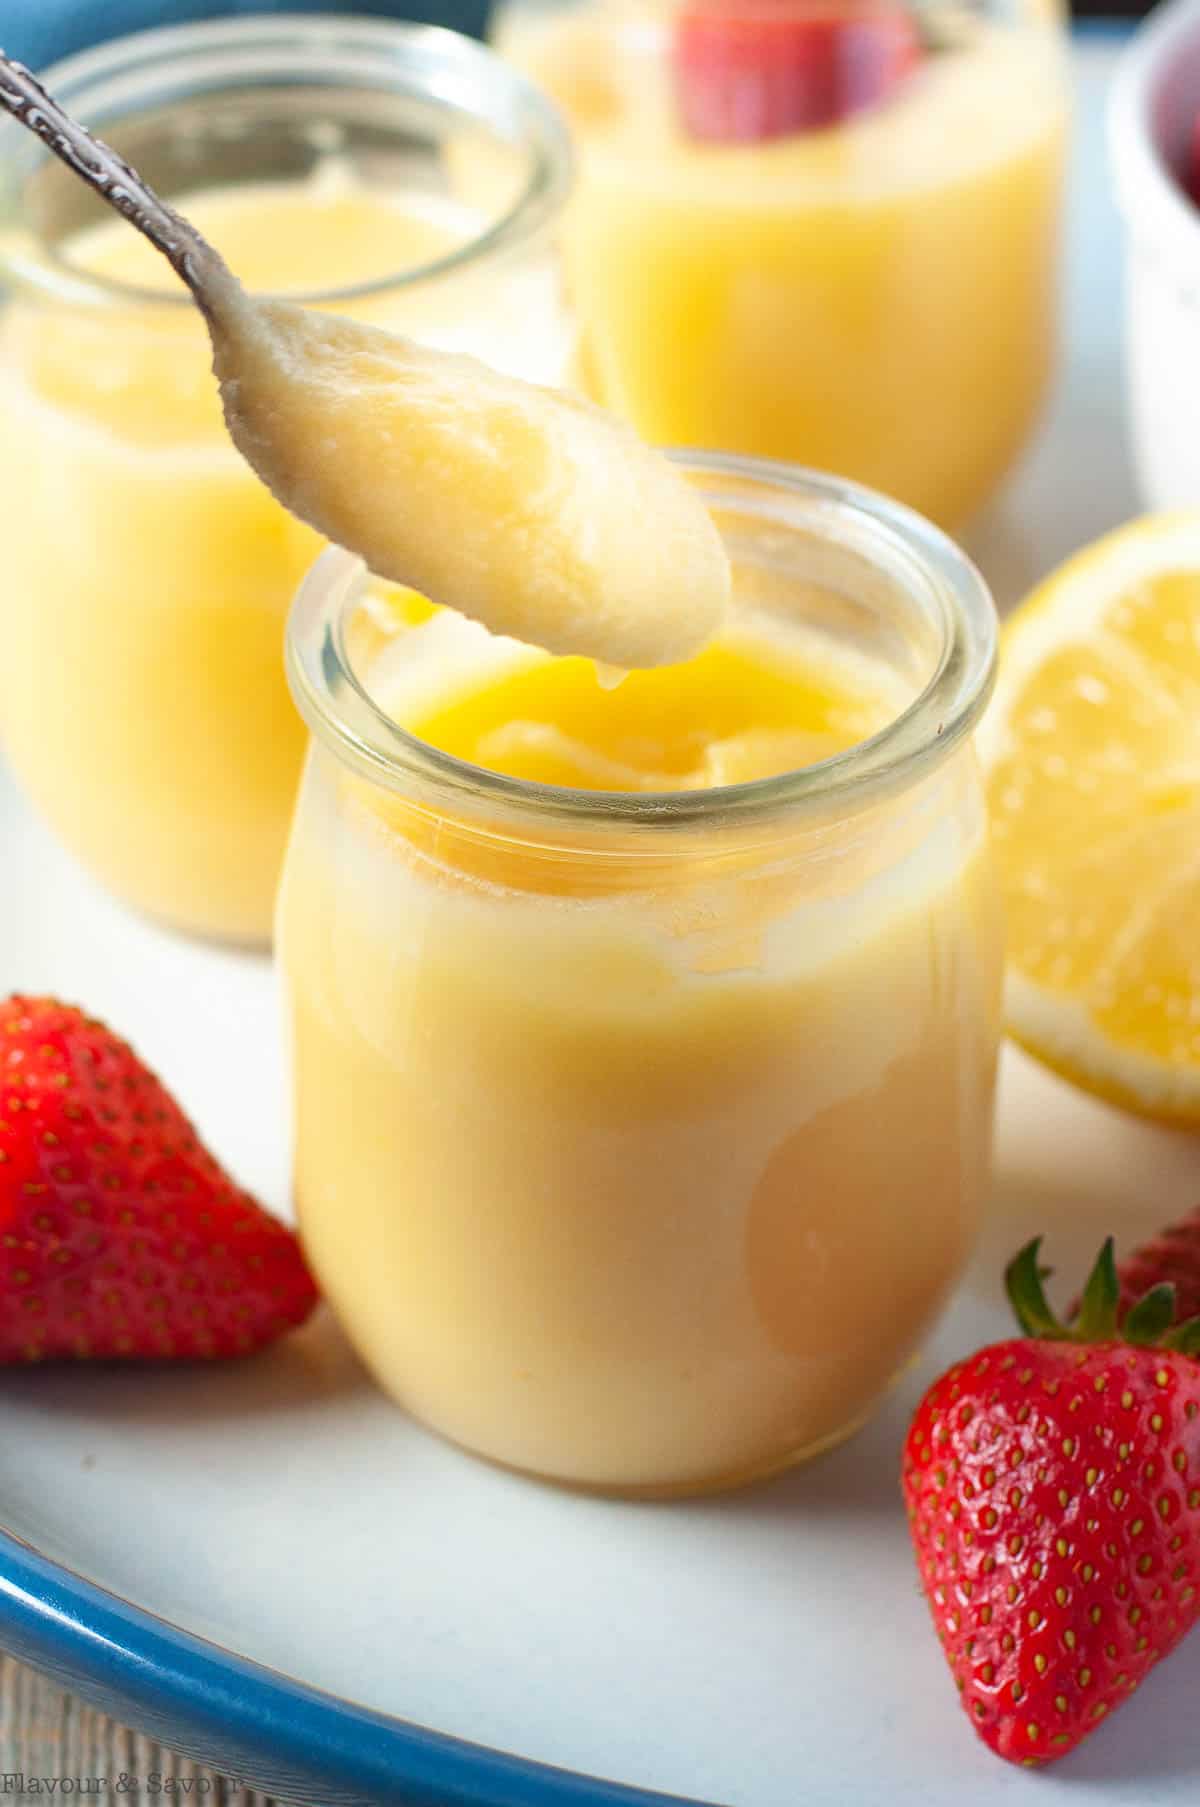 A spoonful of microwave lemon curd from a small jar